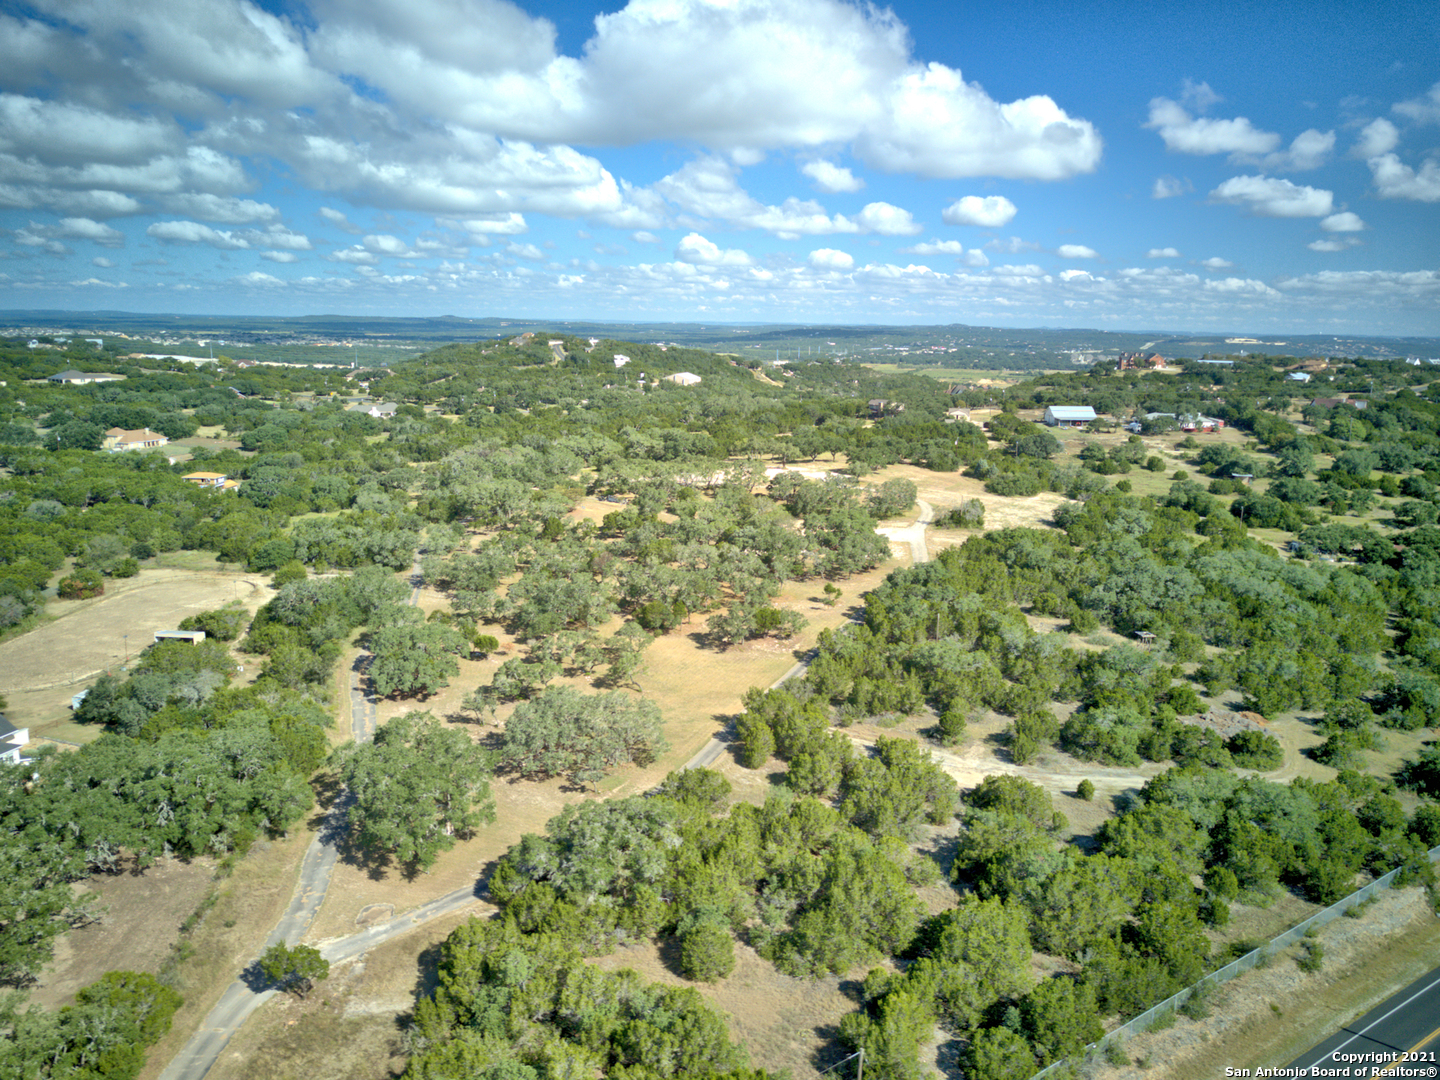 OPEN HOUSE AND LAND TOUR SATURDAY 9 - 11 AM!!  Prime location- 20.5 acres of scenic rolling hills with mature oak trees.  Build a beautiful home with privacy, space and hill country views all around. Or an investor can subdivide into a minimum of 2 acre tracts to build beautiful homes for fast growing area.  Owners would have easy access to charming downtown Bulverde and quickly be able to get to major thorough fares, shopping, and all that San Antonio has to offer. All structures previously on the property have been removed and it is ready for you to make your dreams come true.  Come see it today.